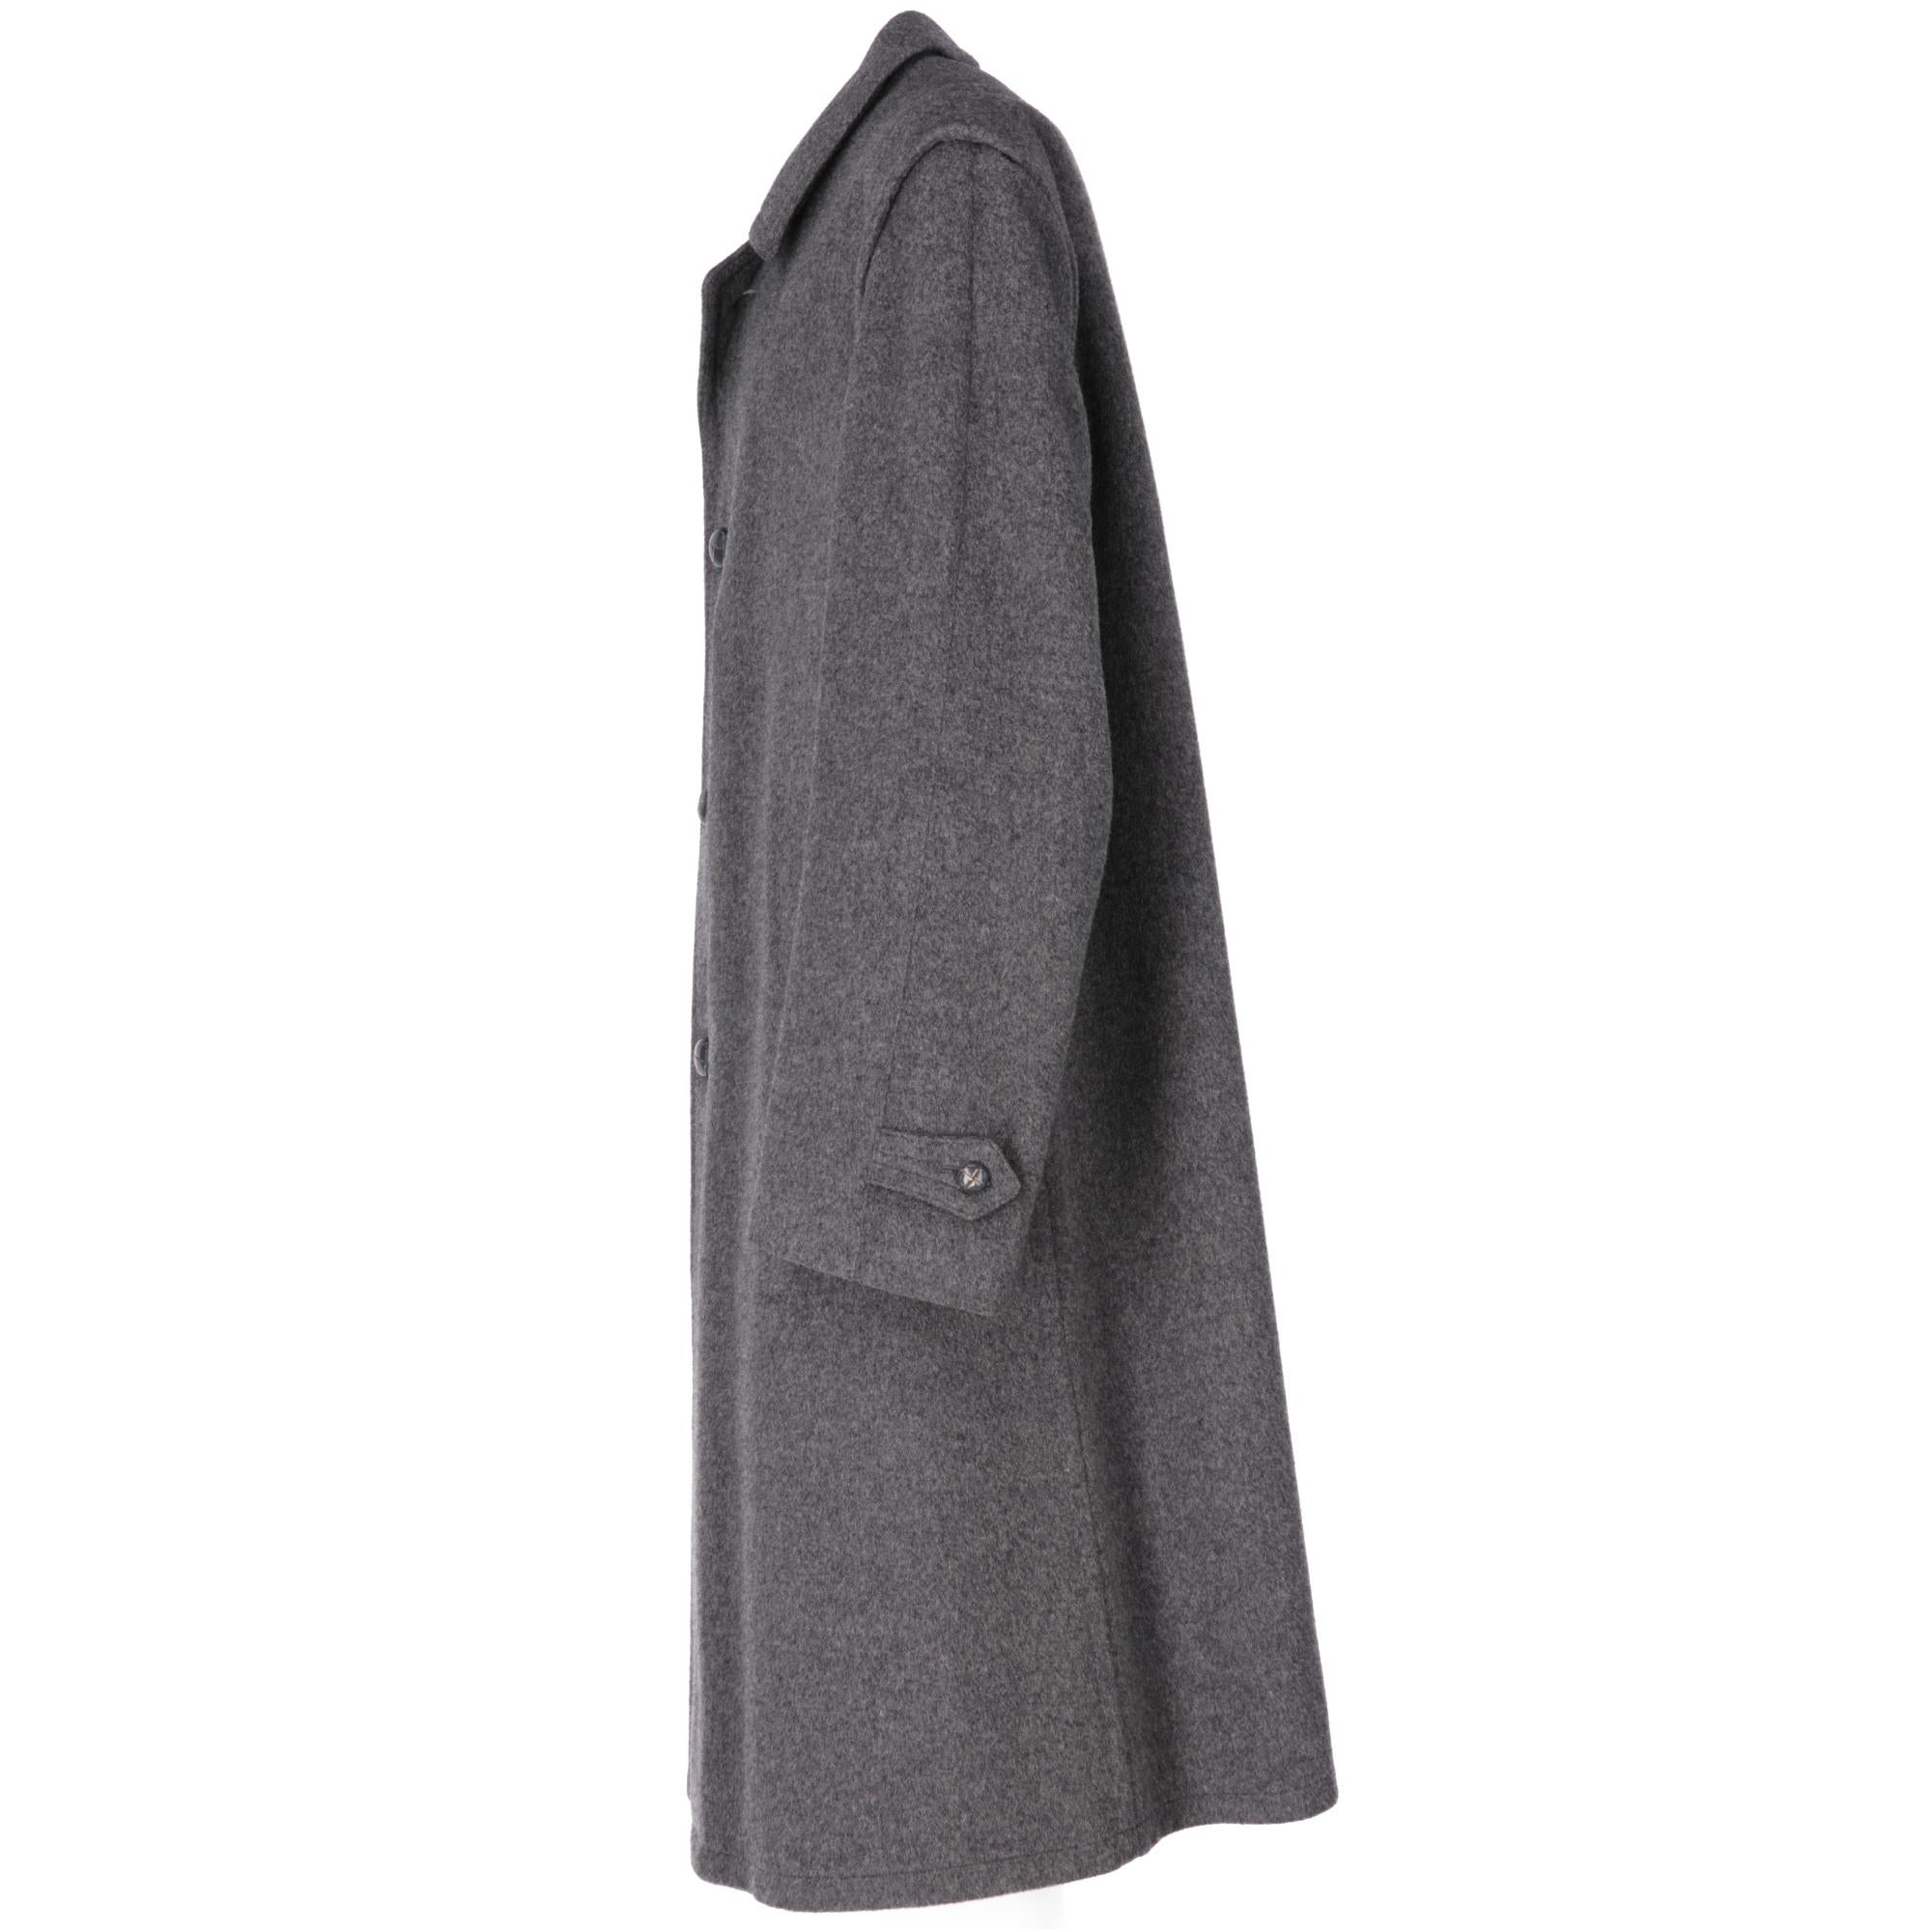 Loden Salko grey wool coat with two front welt pockets, one inner zipped pocket, inverted pleat on back, classic collar, front closure with covered leather buttons.

The loden from Austria was created by the brand Salko.
The 